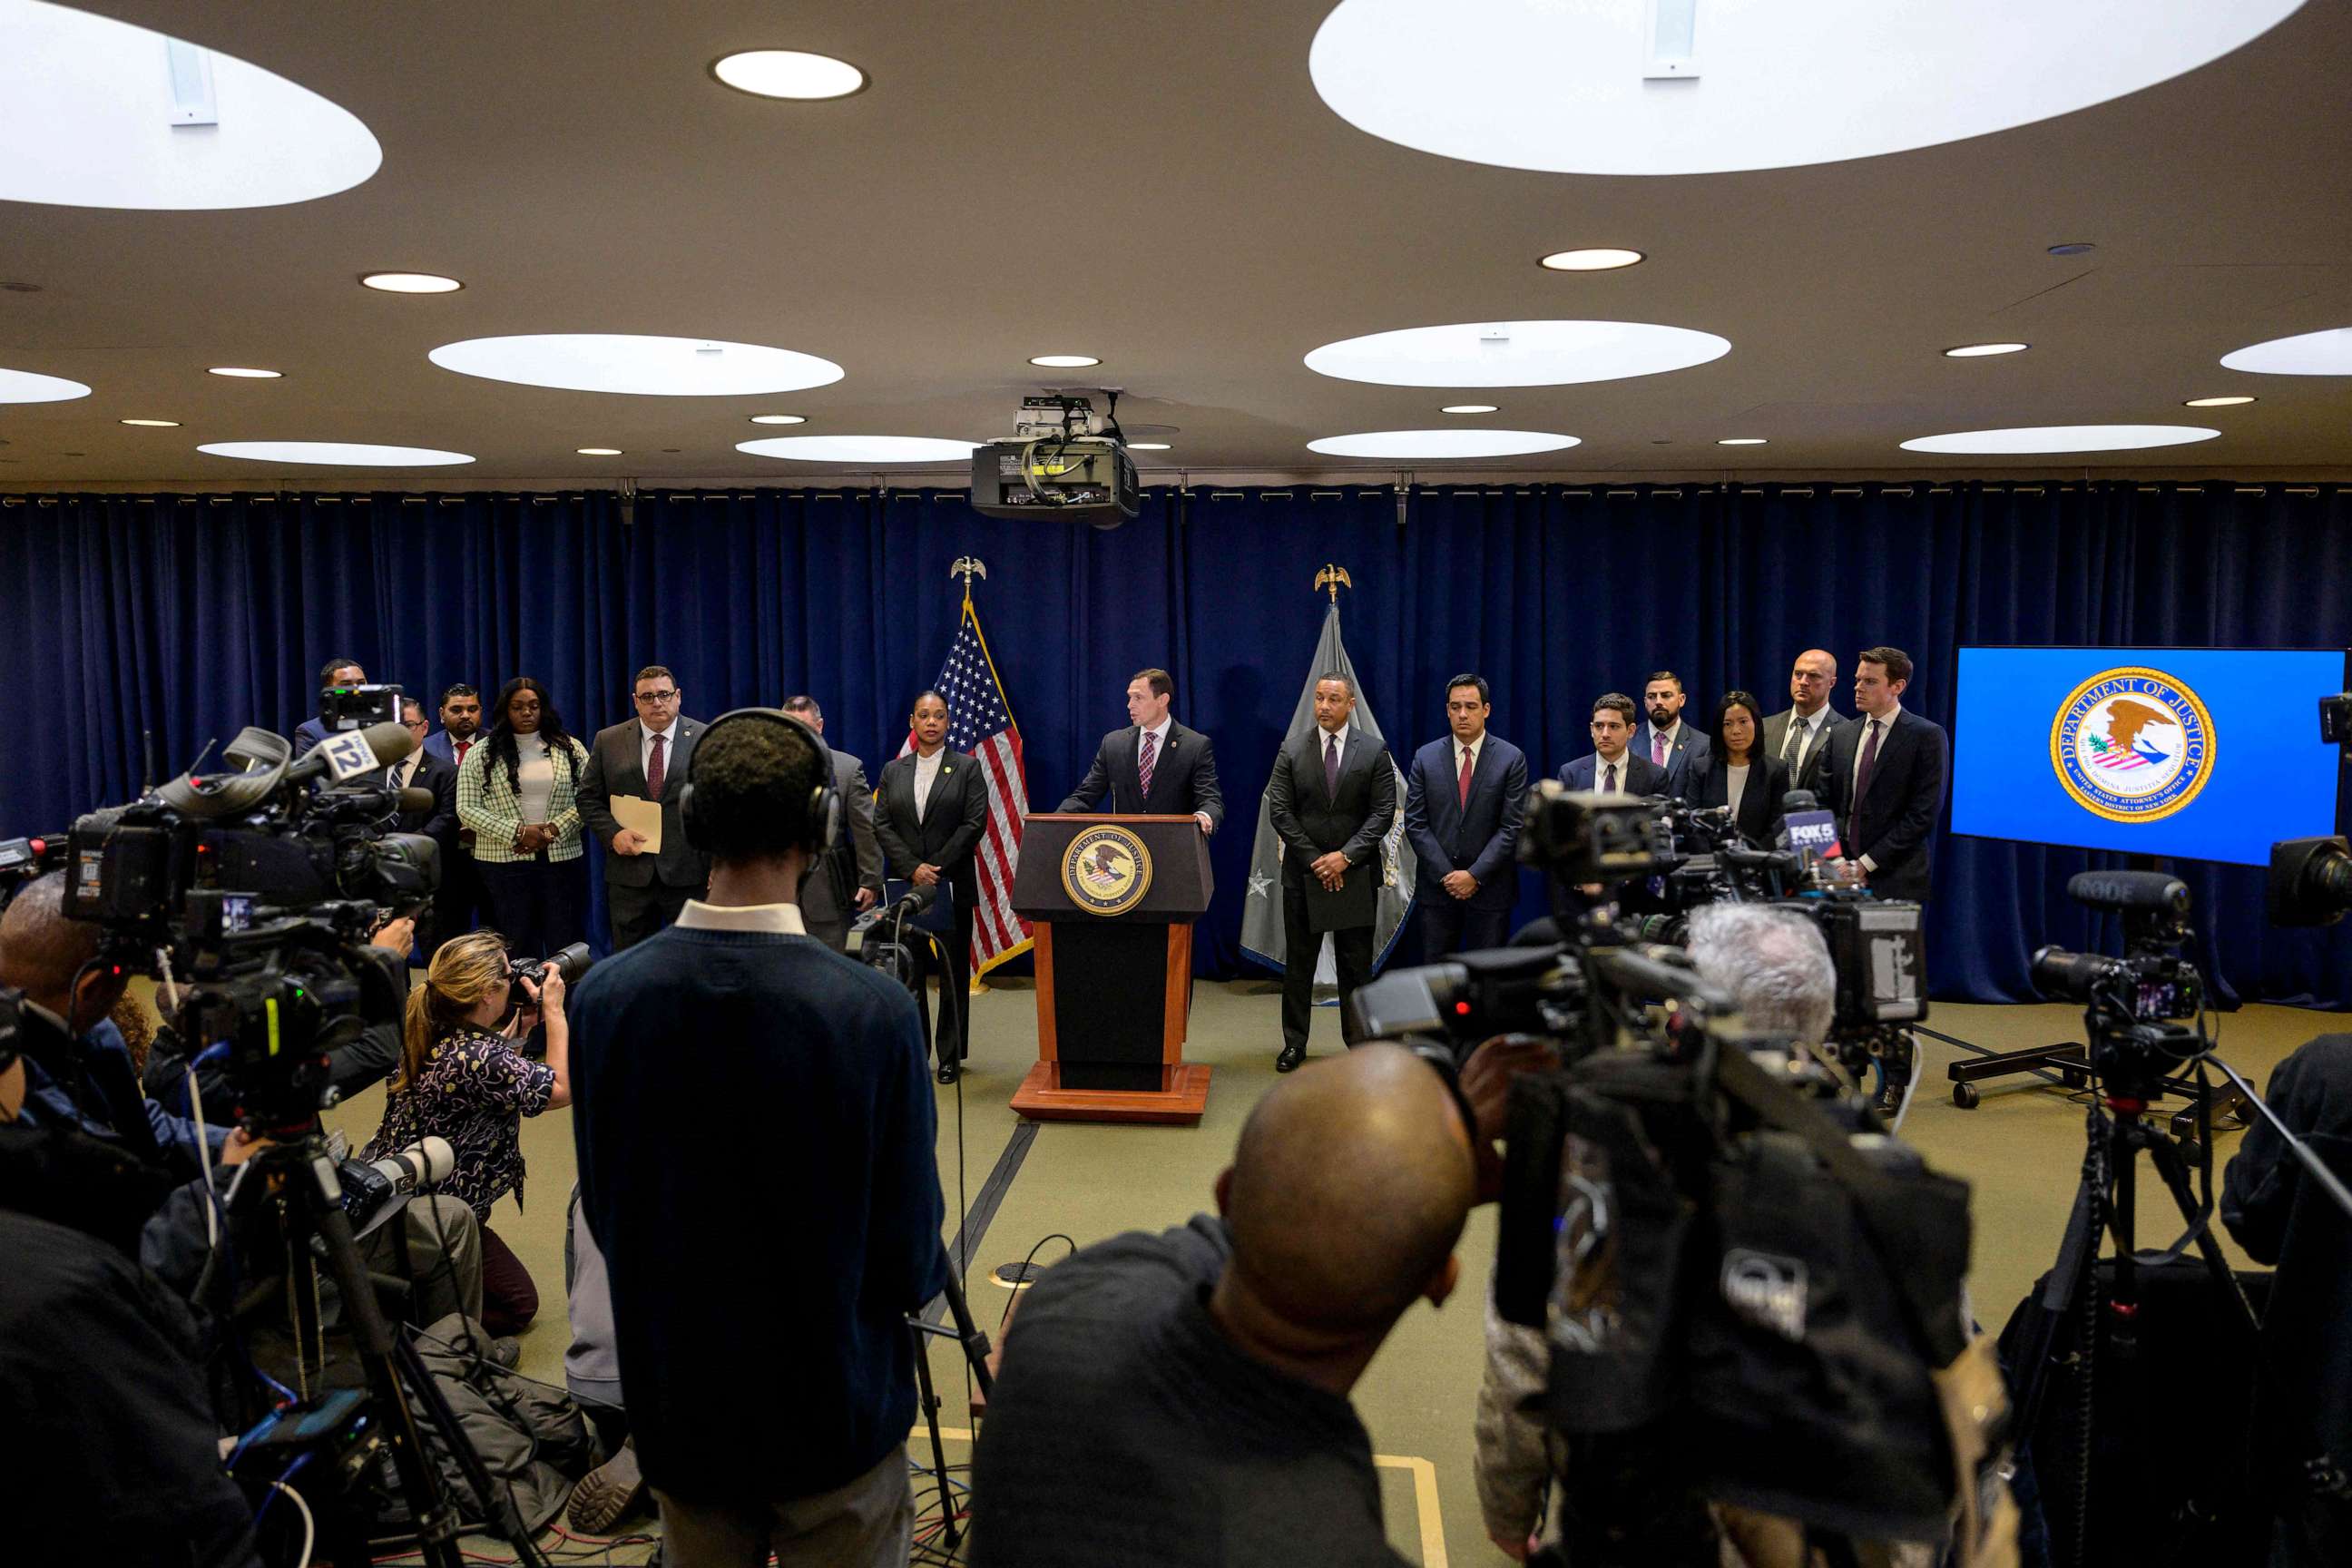 PHOTO: Drug Enforcement Administration Special Agent-in-Charge Frank Tarentino speaks during a press conference announcing arrests in a major gun trafficking case, Jan. 11, 2023 in New York City.